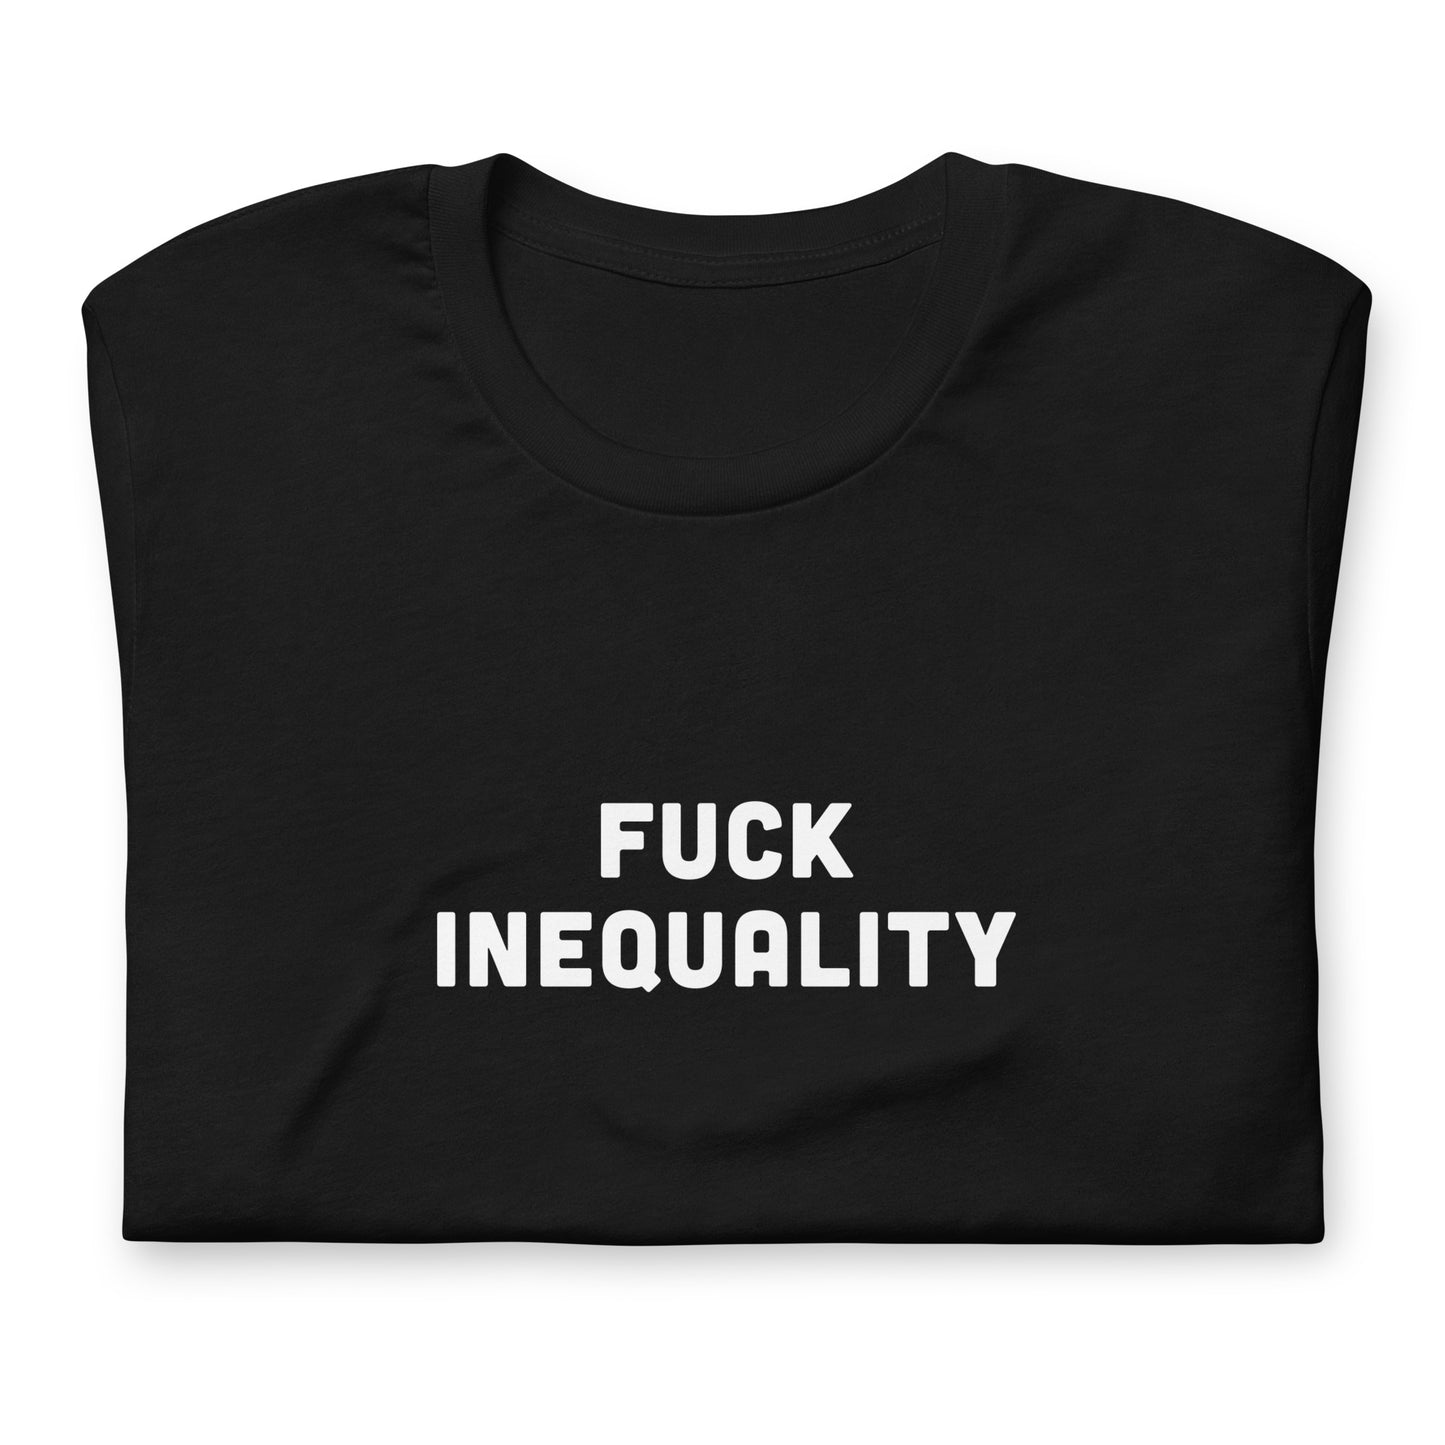 Fuck Inequality T-Shirt Size M Color Black